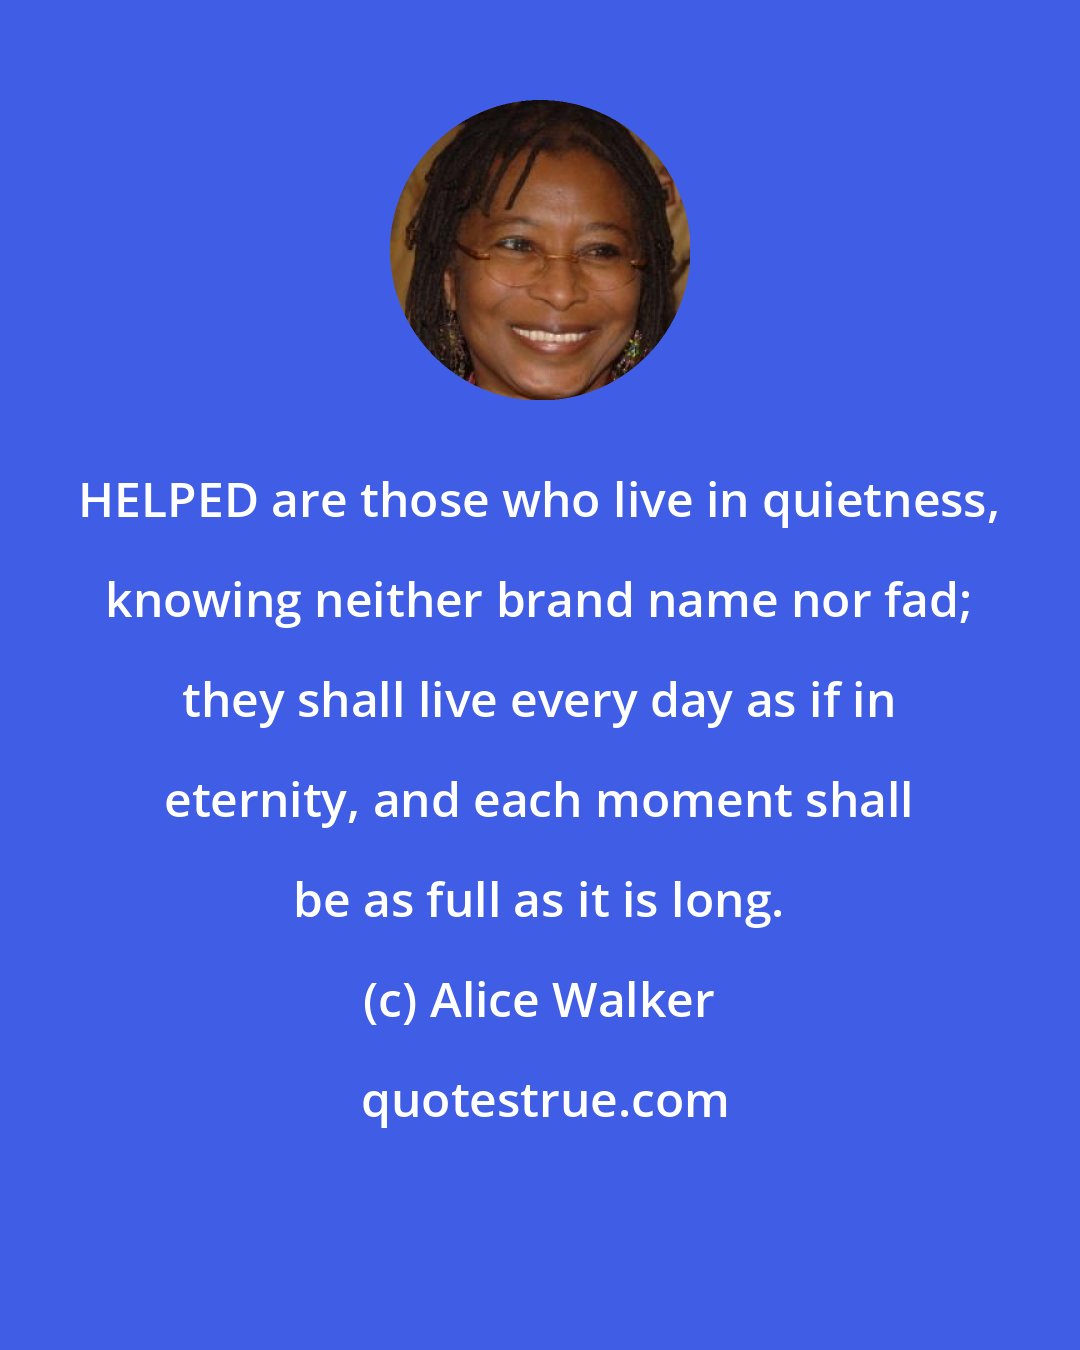 Alice Walker: HELPED are those who live in quietness, knowing neither brand name nor fad; they shall live every day as if in eternity, and each moment shall be as full as it is long.